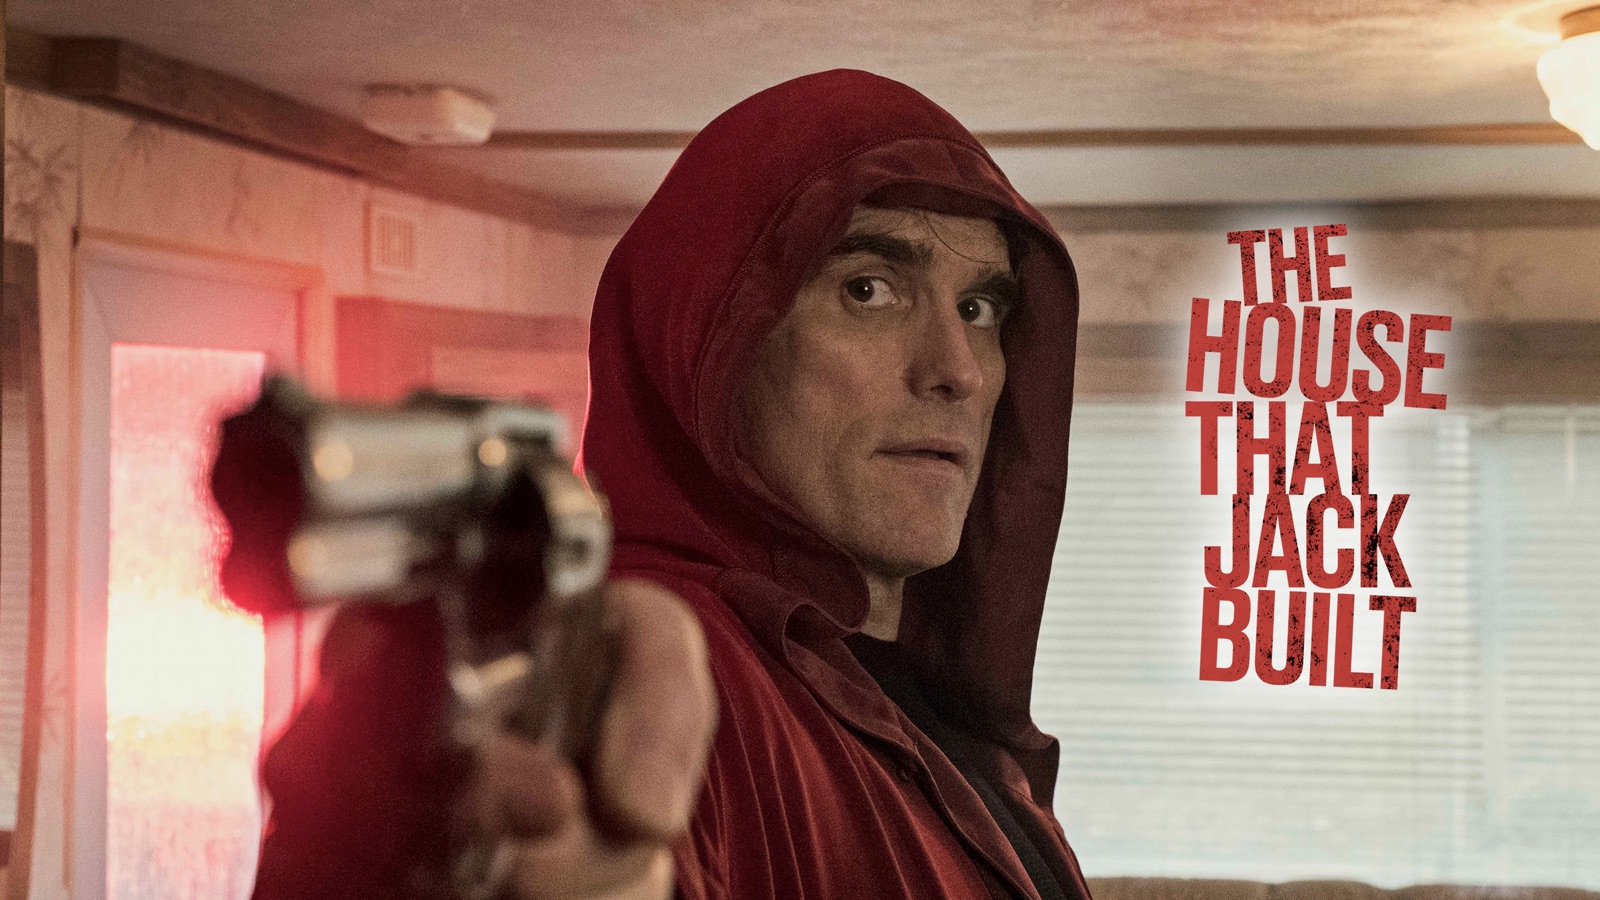 the house that jack built poster design